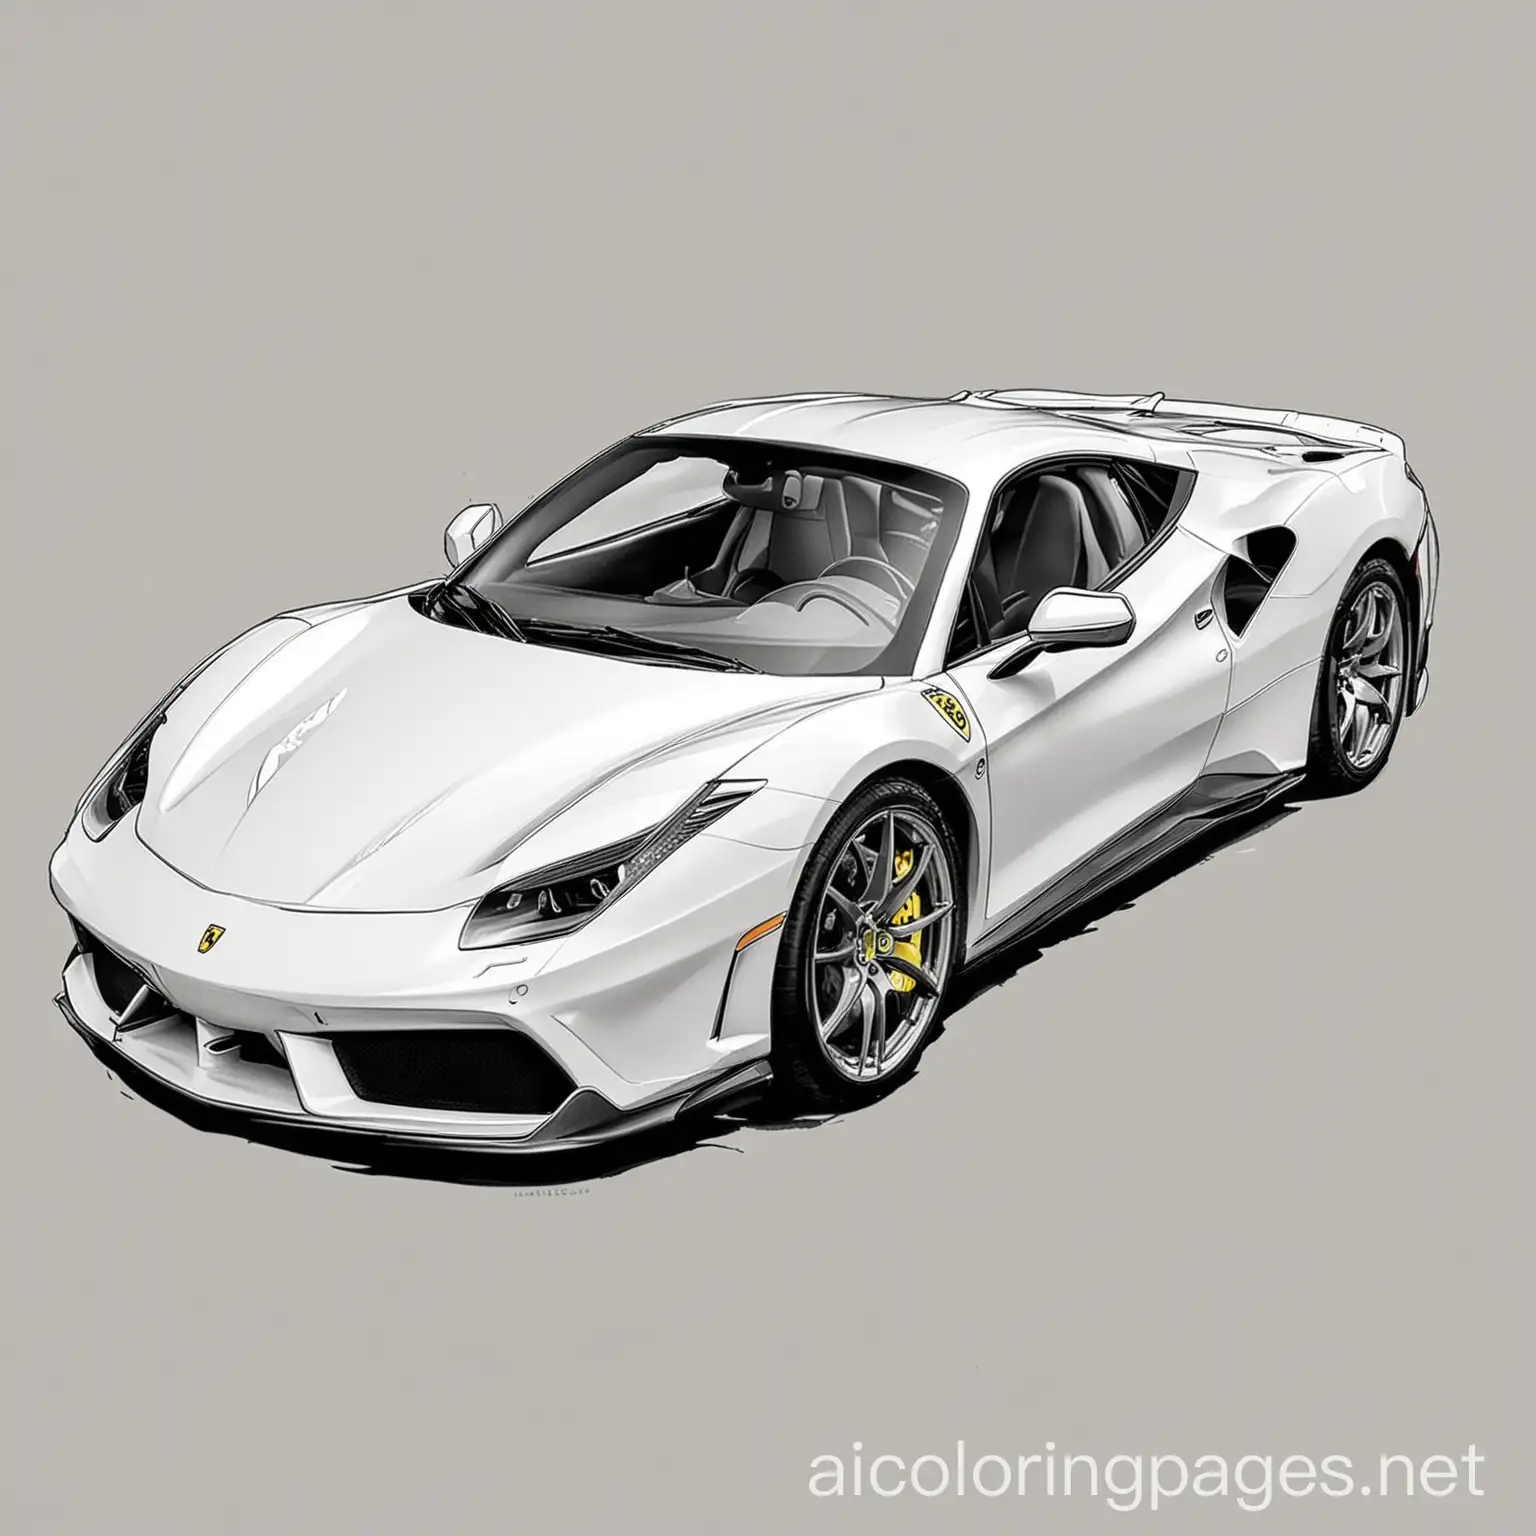 Simple-Black-and-White-Ferrari-Coloring-Page